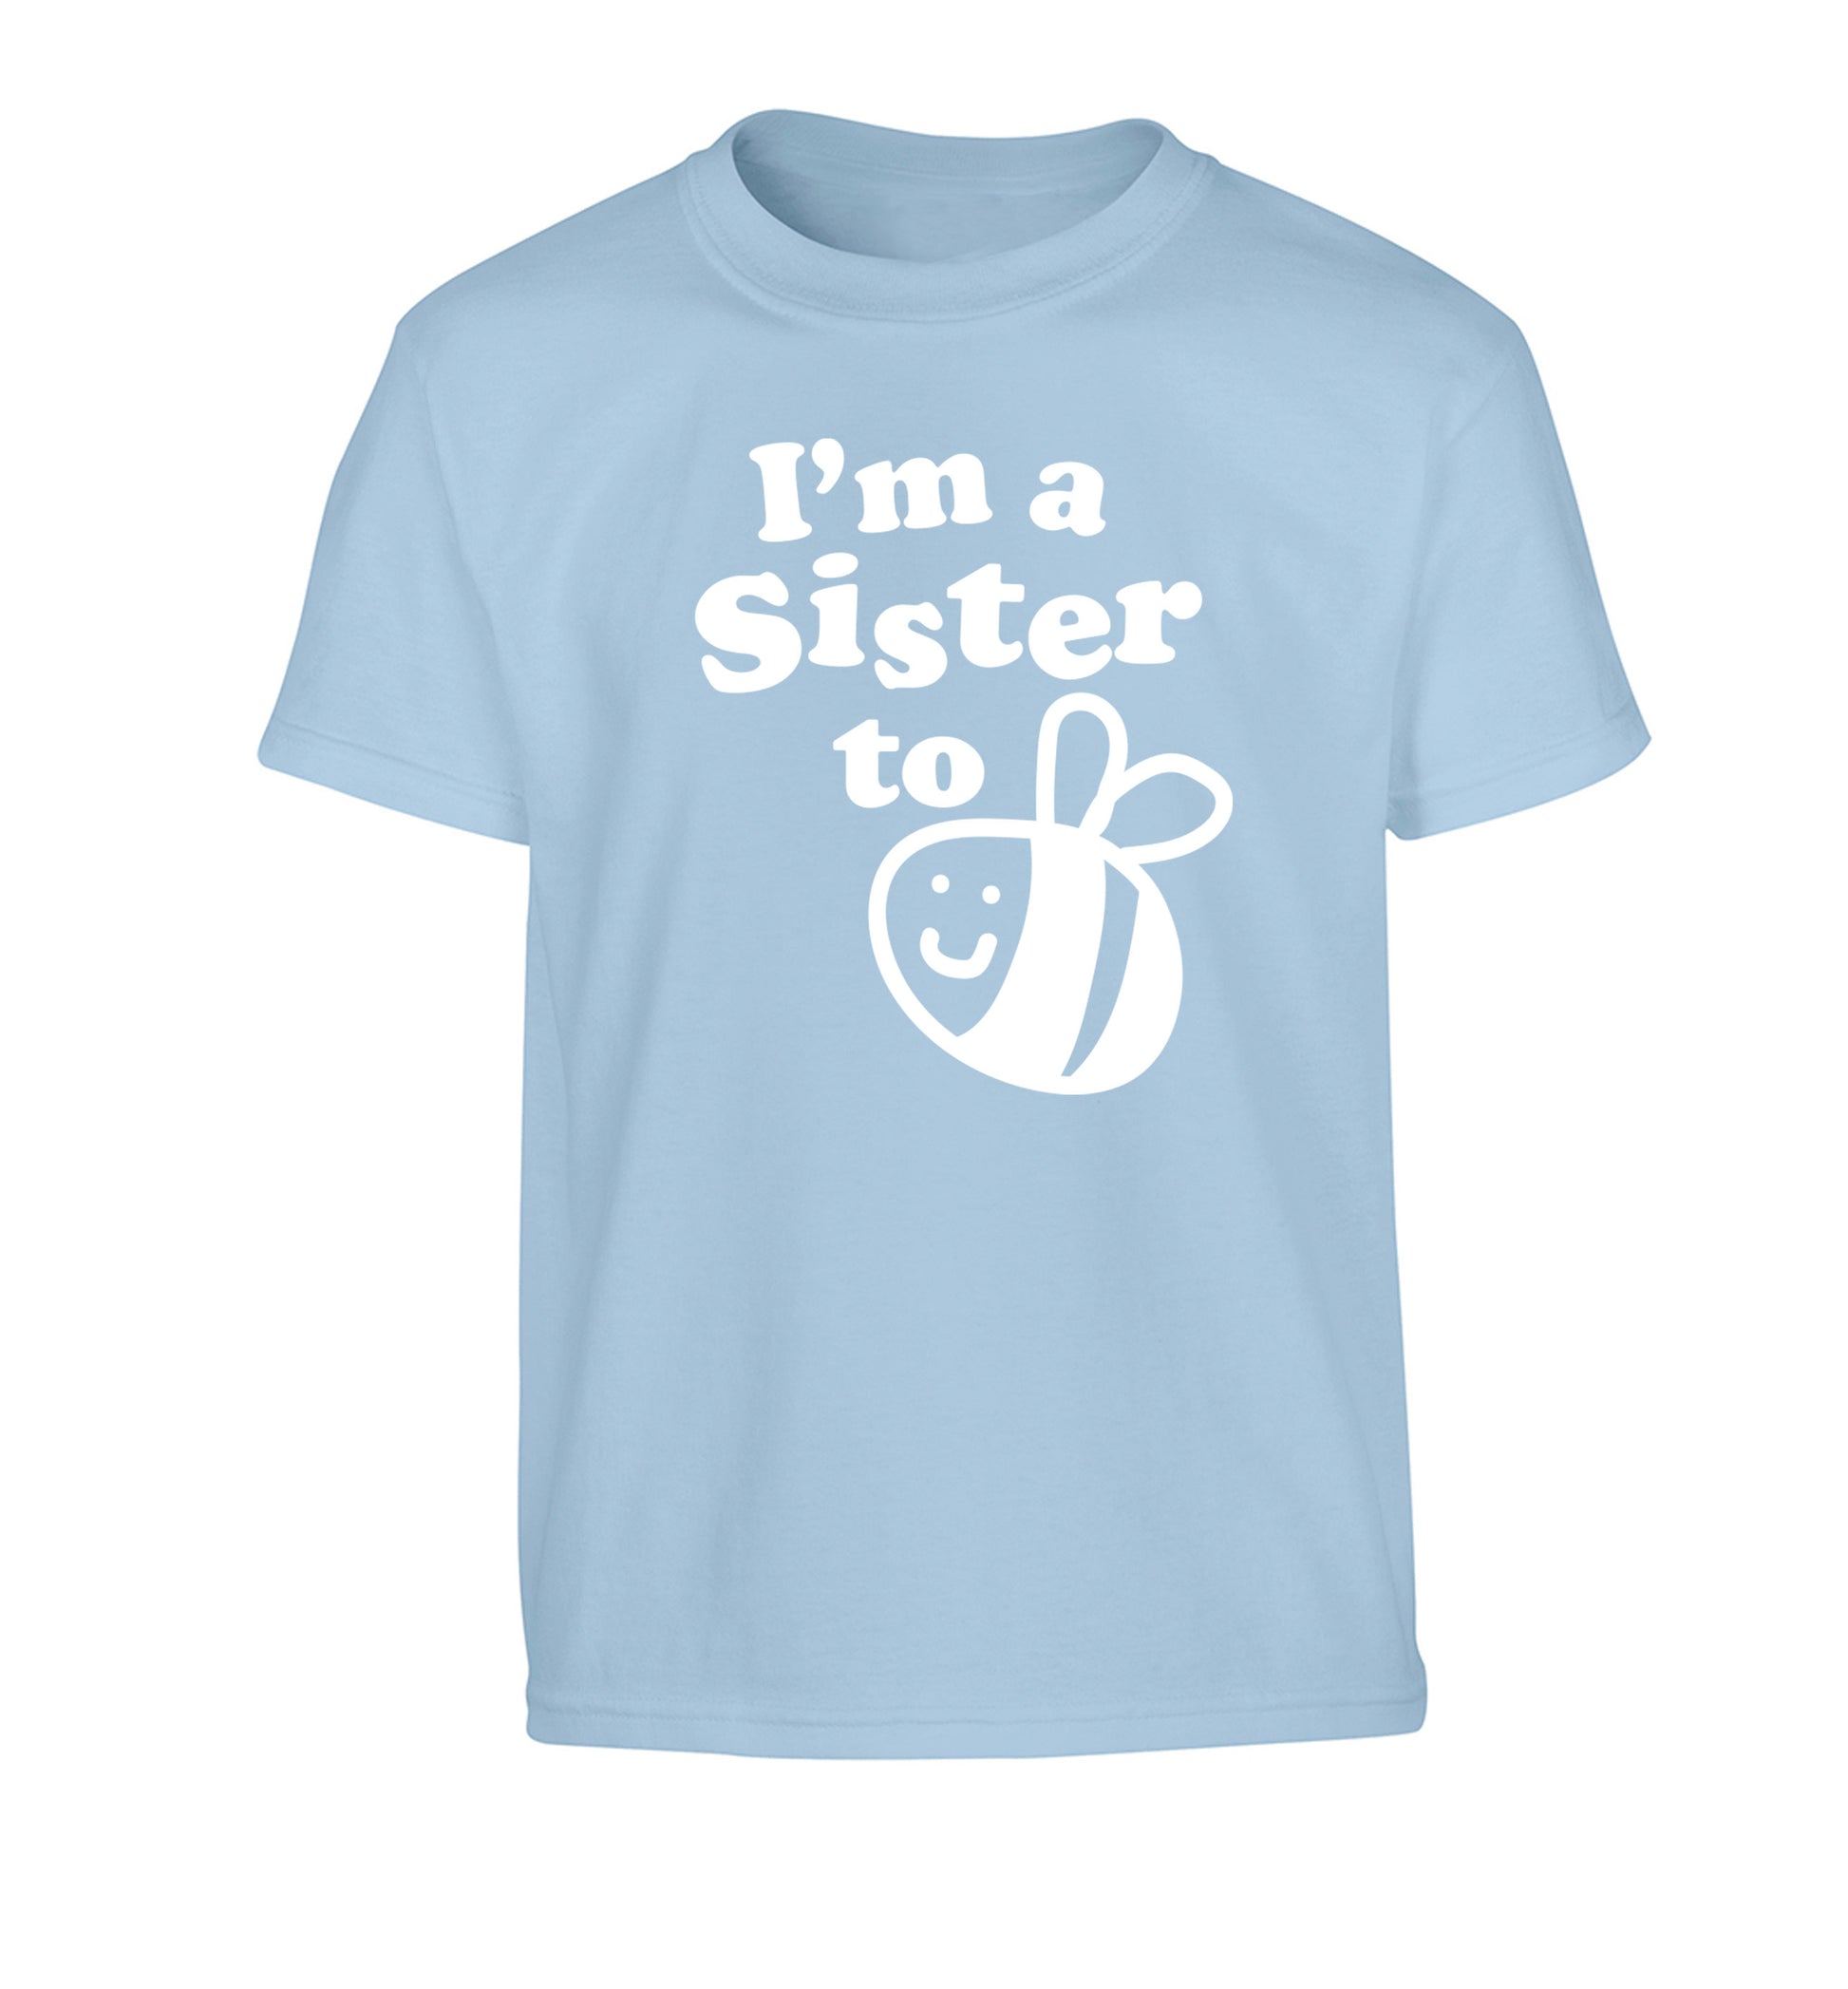 I'm a sister to be Children's light blue Tshirt 12-14 Years